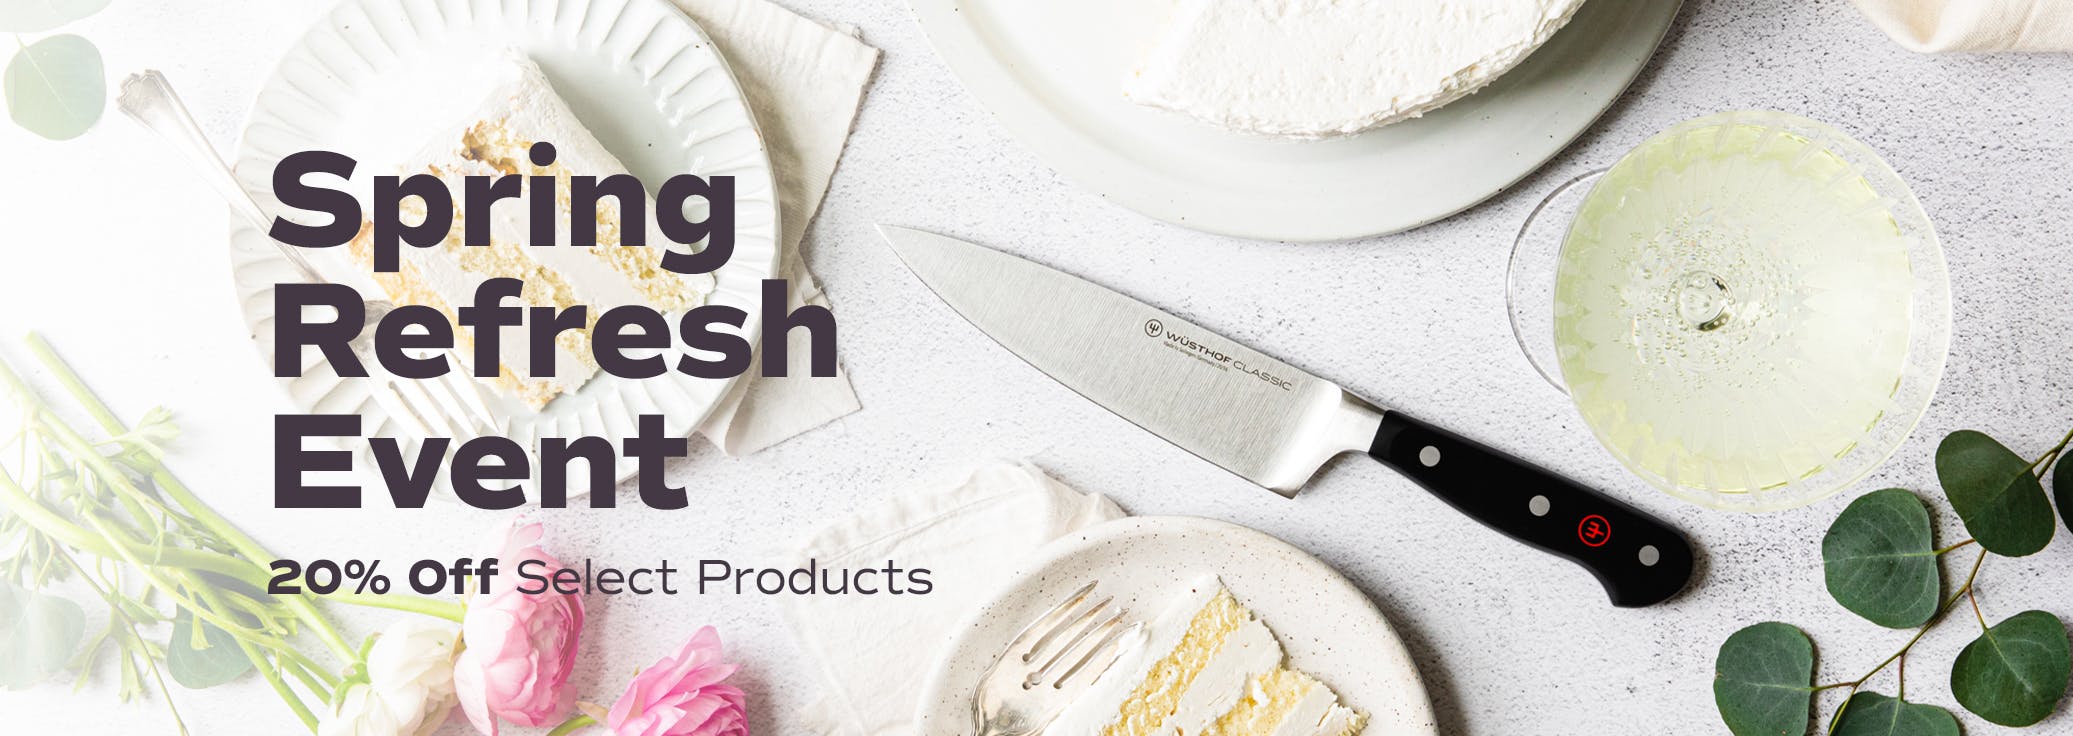 Spring Sale with 6" Classic Chef's Knife next to cake